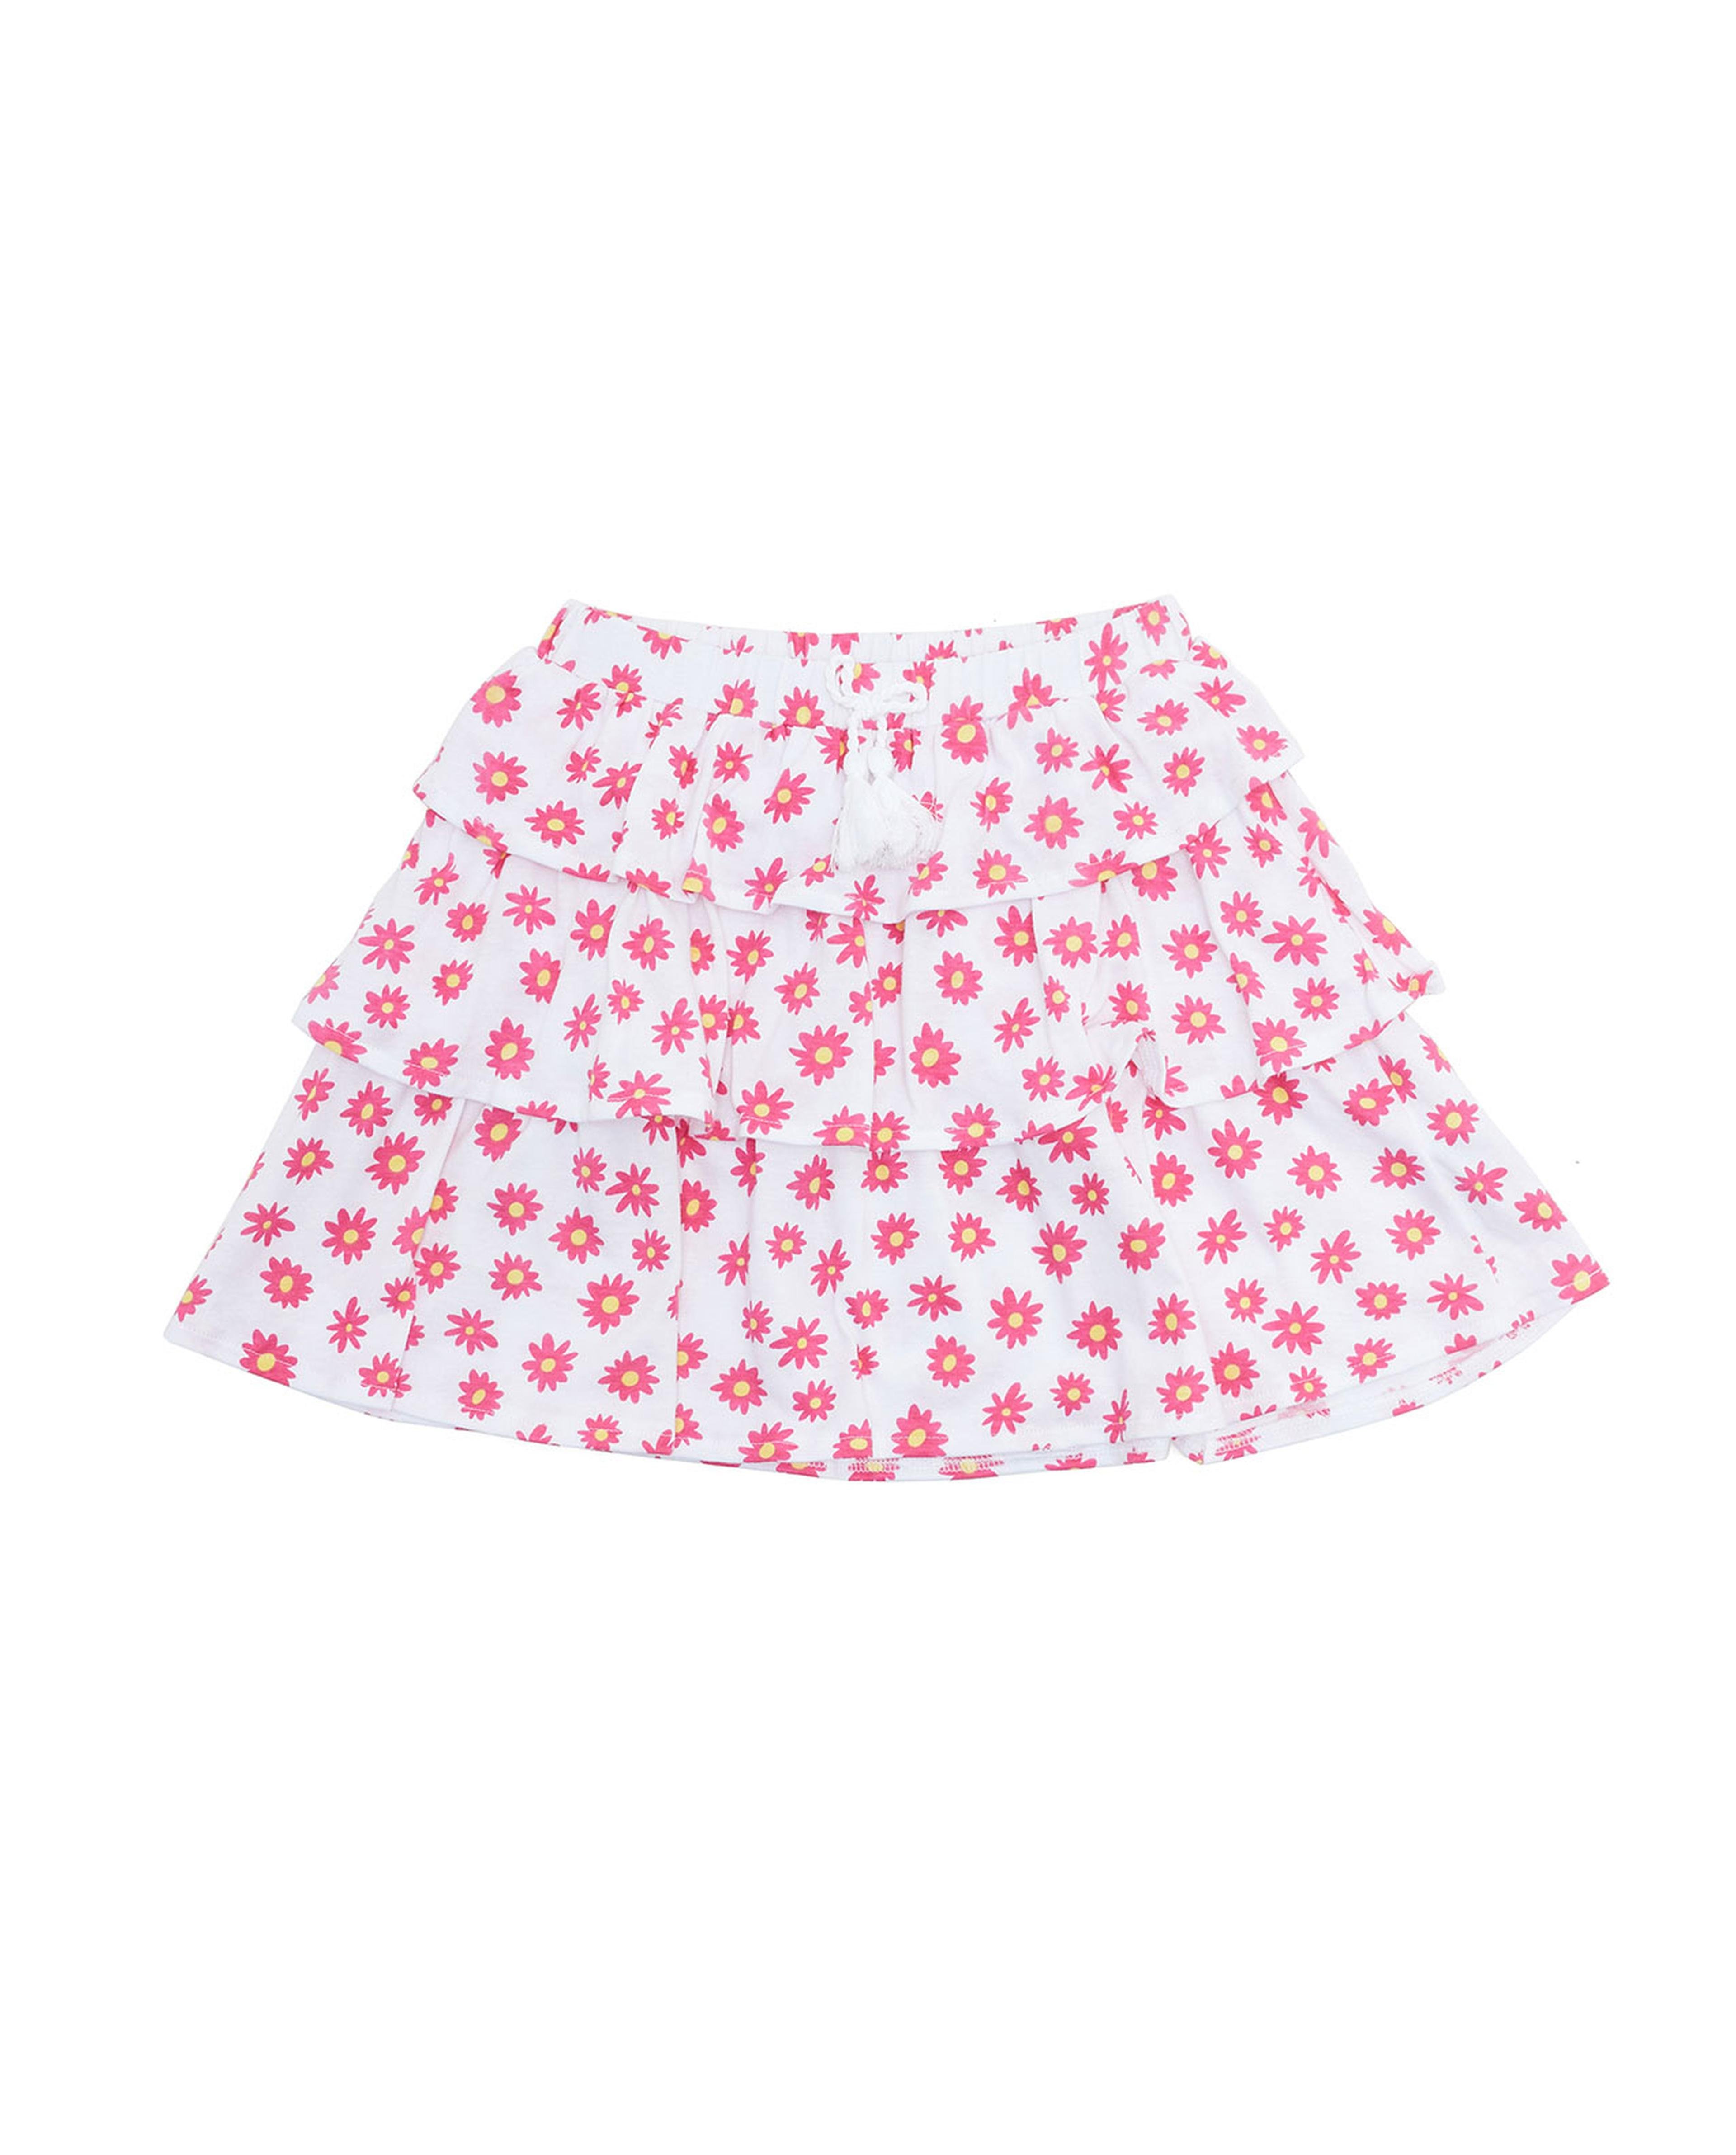 Pack of 2 Layered Skirts